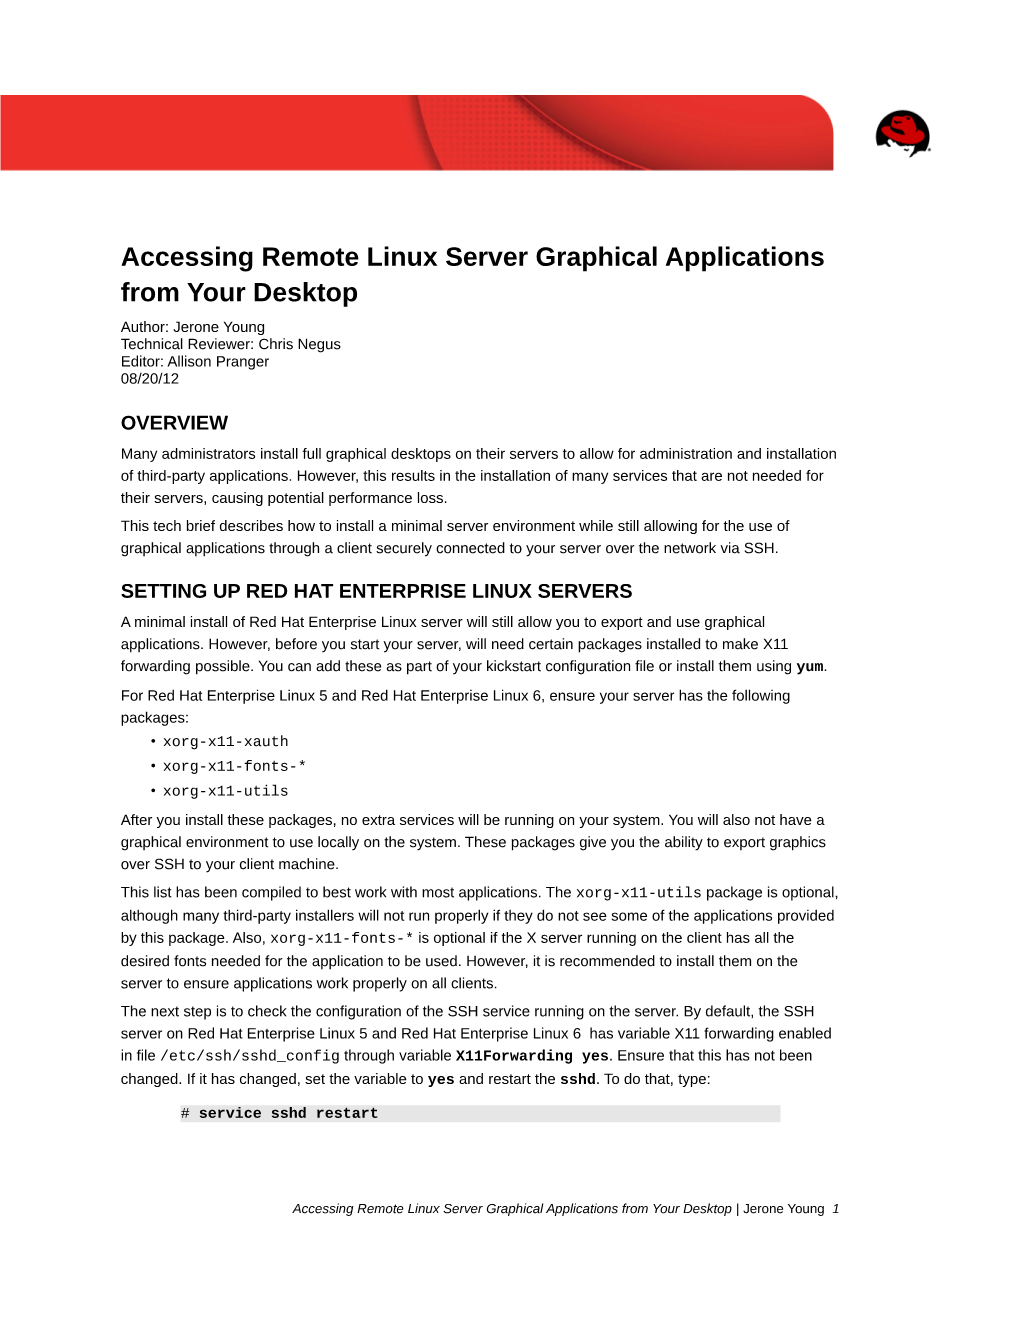 Accessing Remote Linux Server Graphical Applications from Your Desktop Author: Jerone Young Technical Reviewer: Chris Negus Editor: Allison Pranger 08/20/12